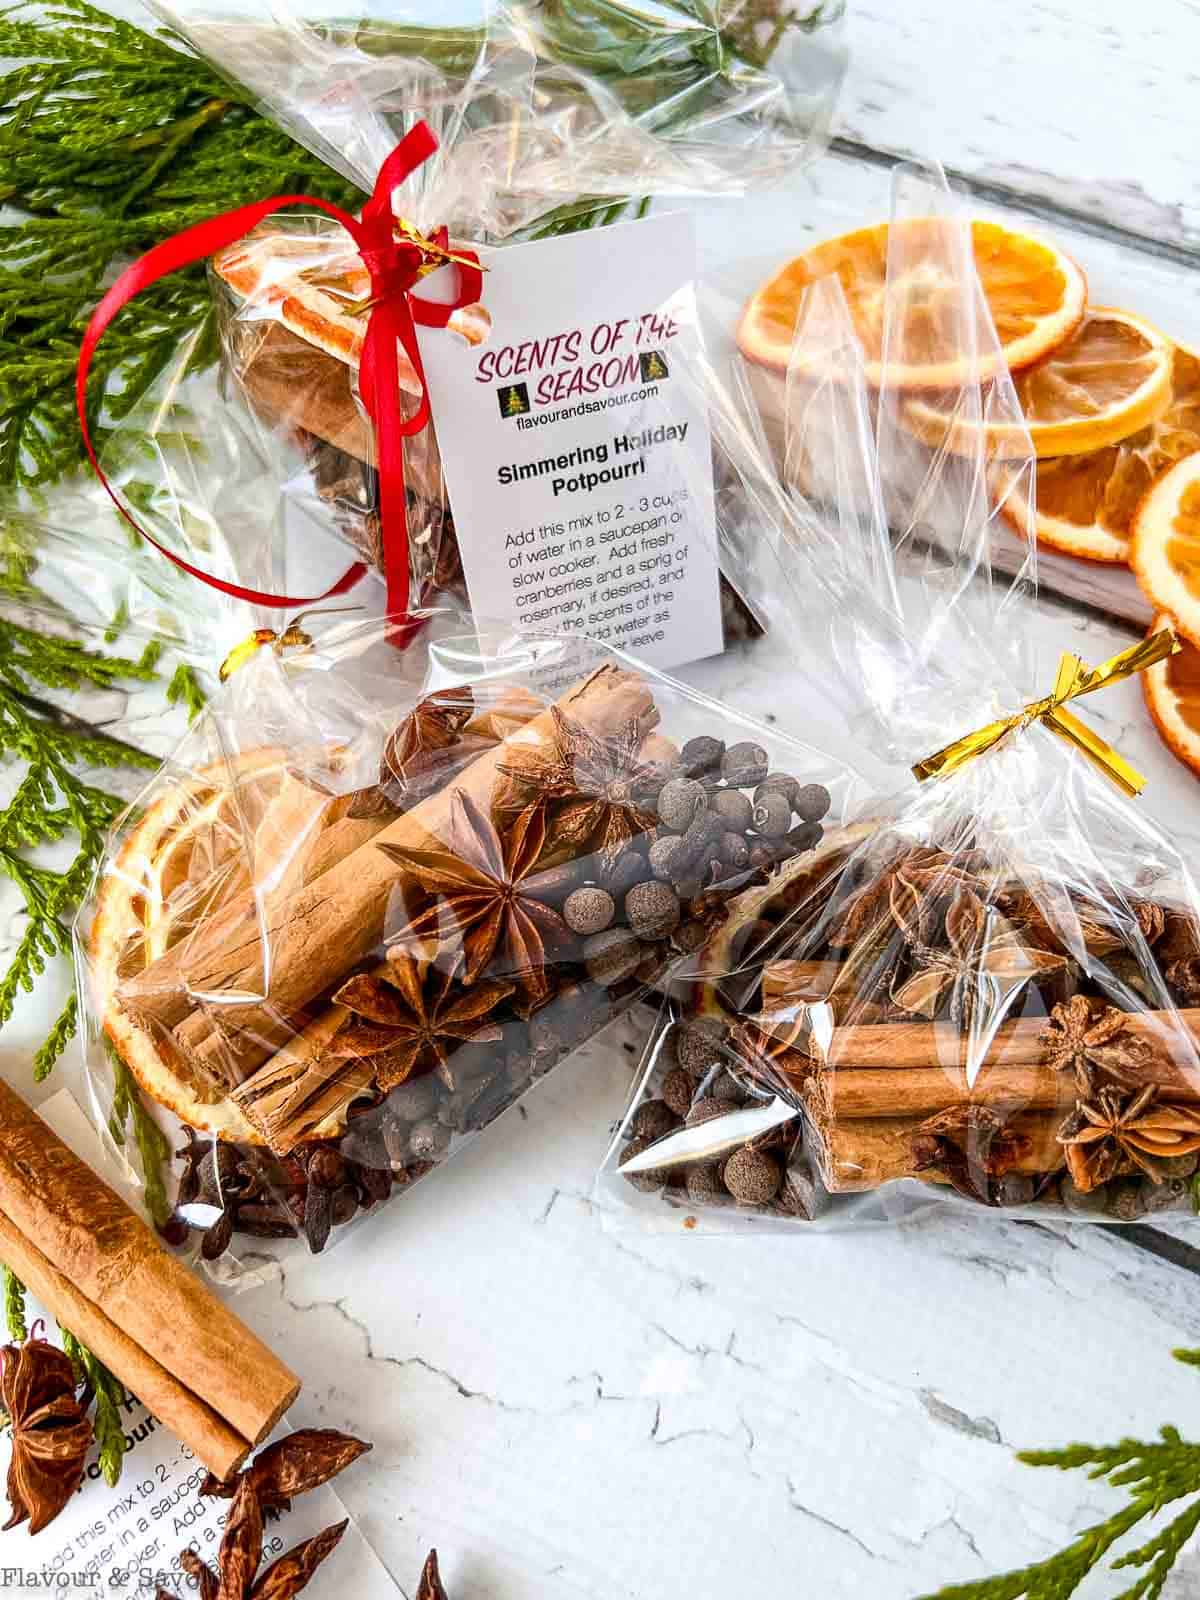 Cellophane packages of dried spice mix with dried oranges to make a Christmas simmer pot.